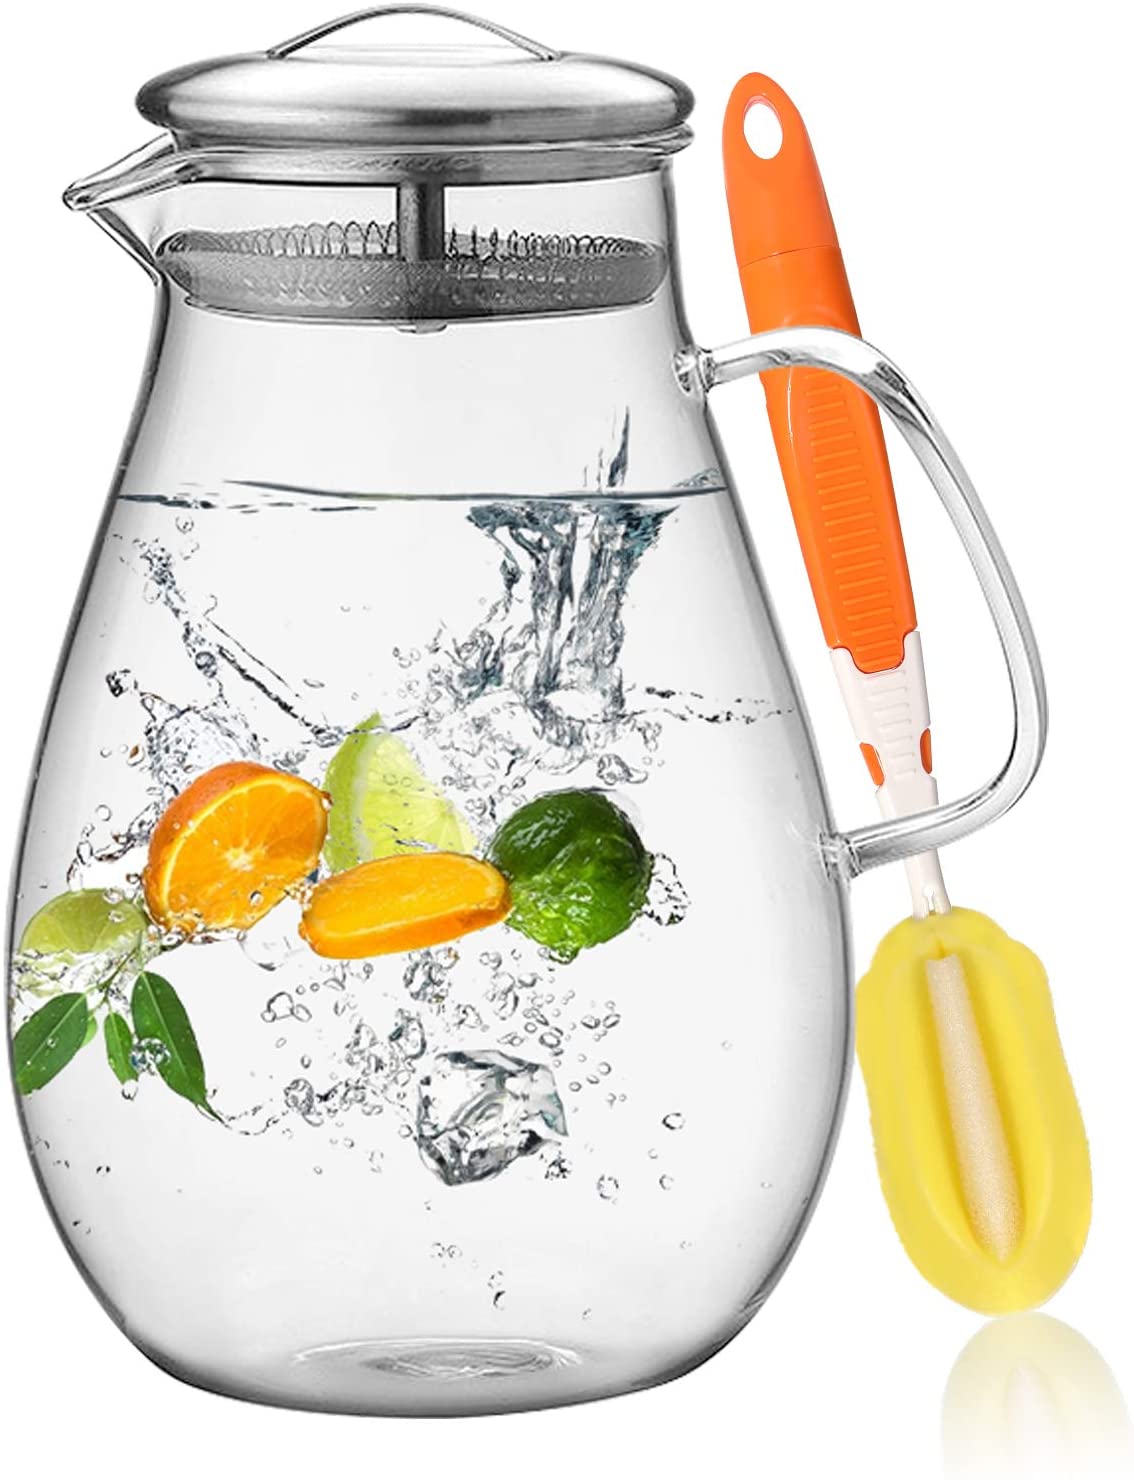 https://www.dontwasteyourmoney.com/wp-content/uploads/2021/04/hiware-64-ounce-glass-pitcher-with-stainless-steel-lid-pitcher.jpg